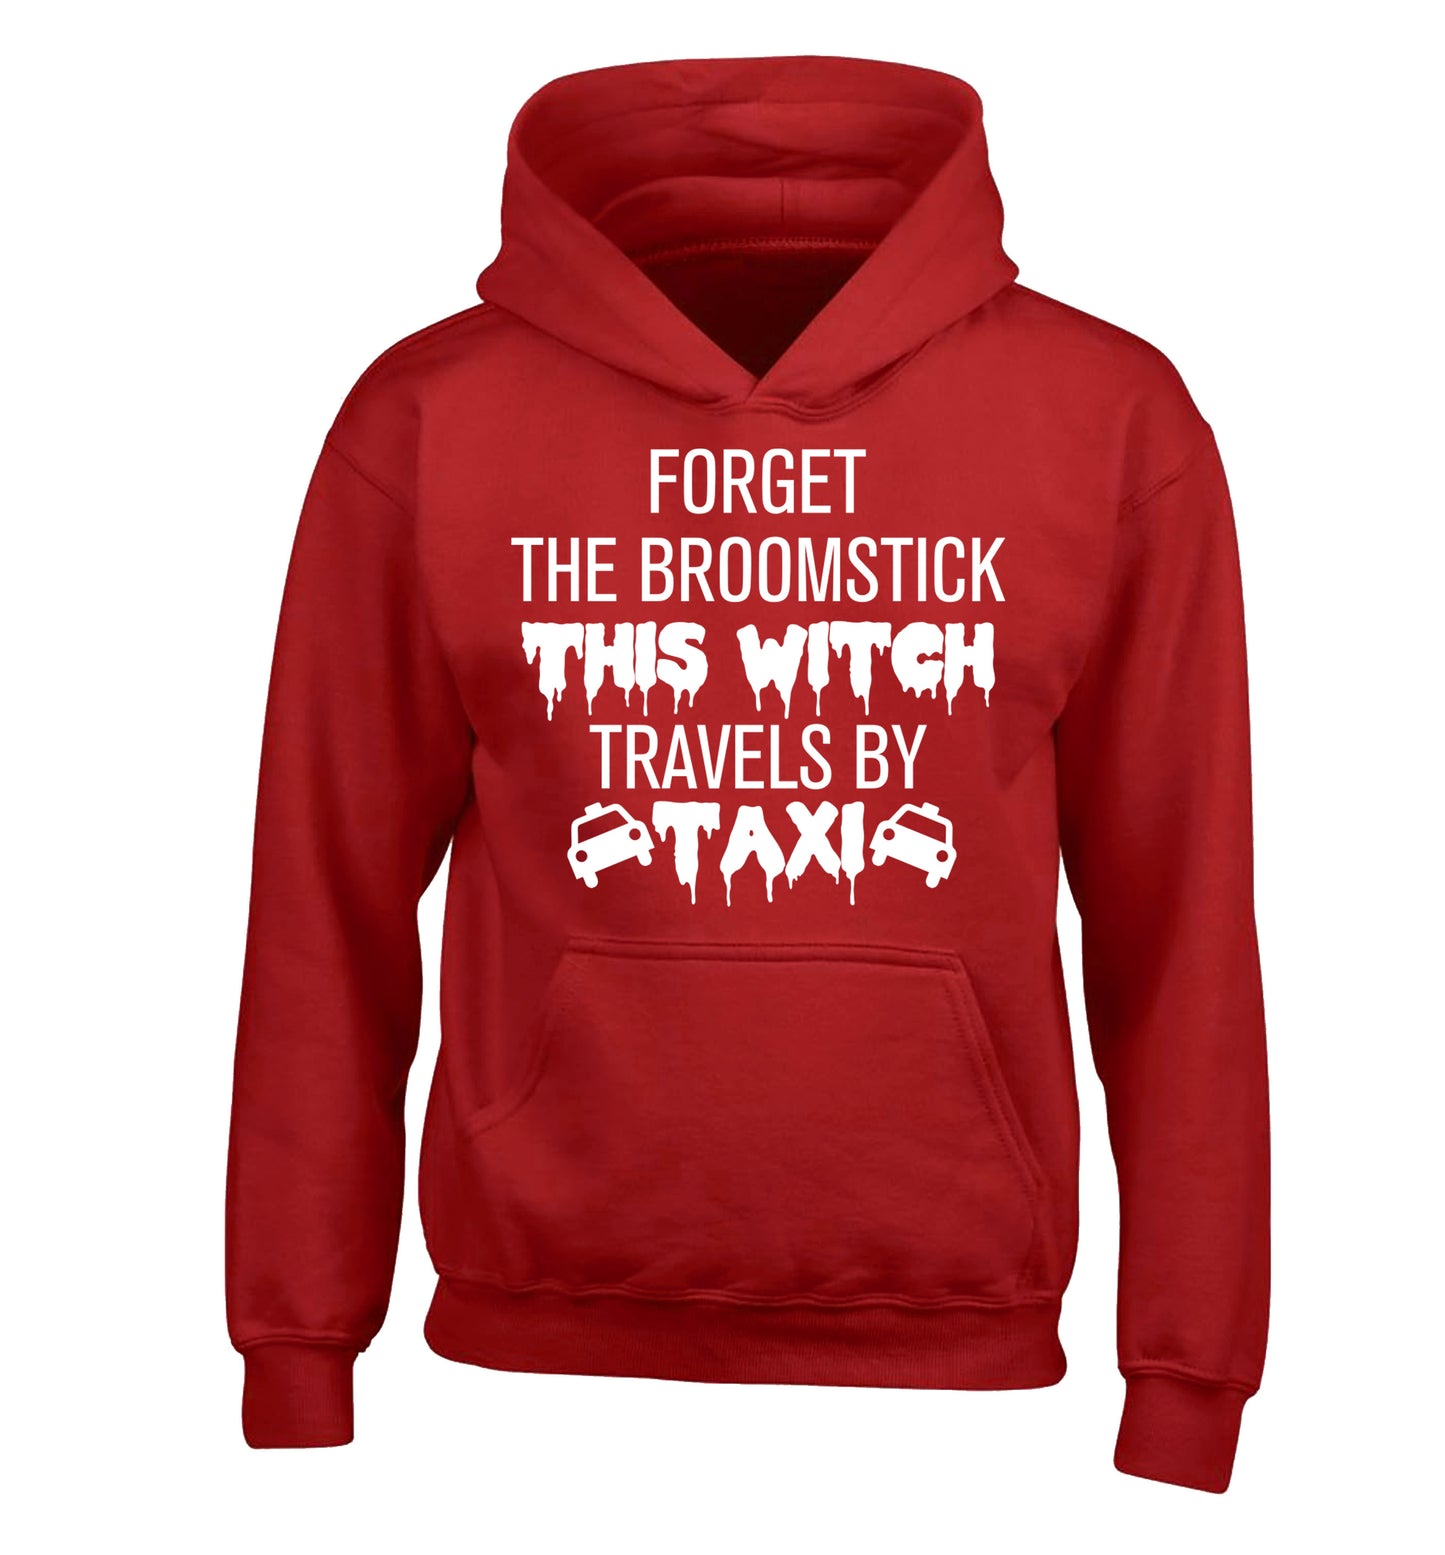 Forget the broomstick this witch travels by taxi children's red hoodie 12-14 Years